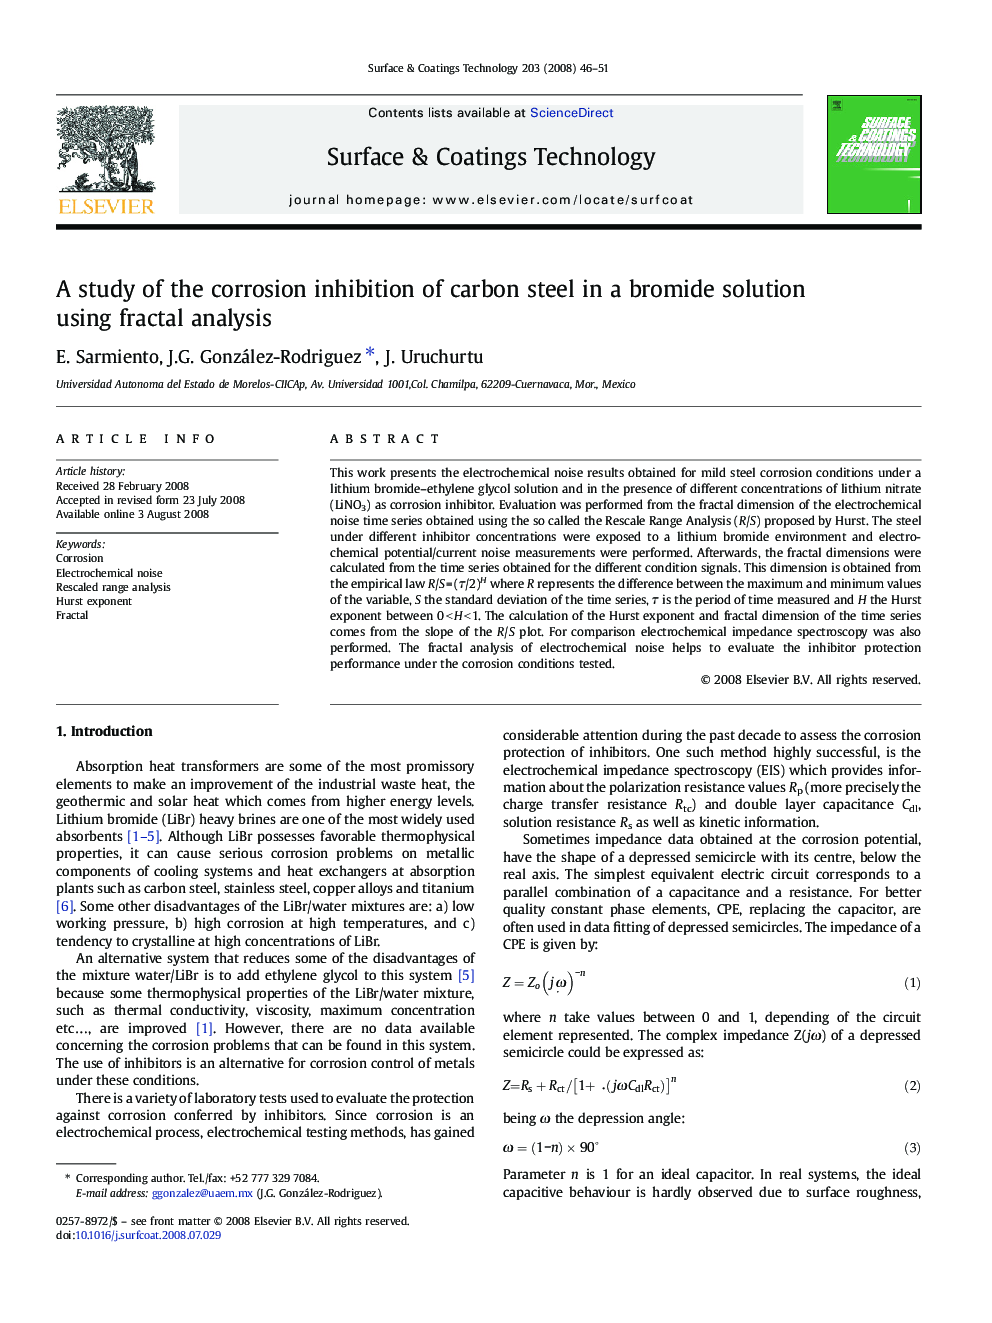 A study of the corrosion inhibition of carbon steel in a bromide solution using fractal analysis